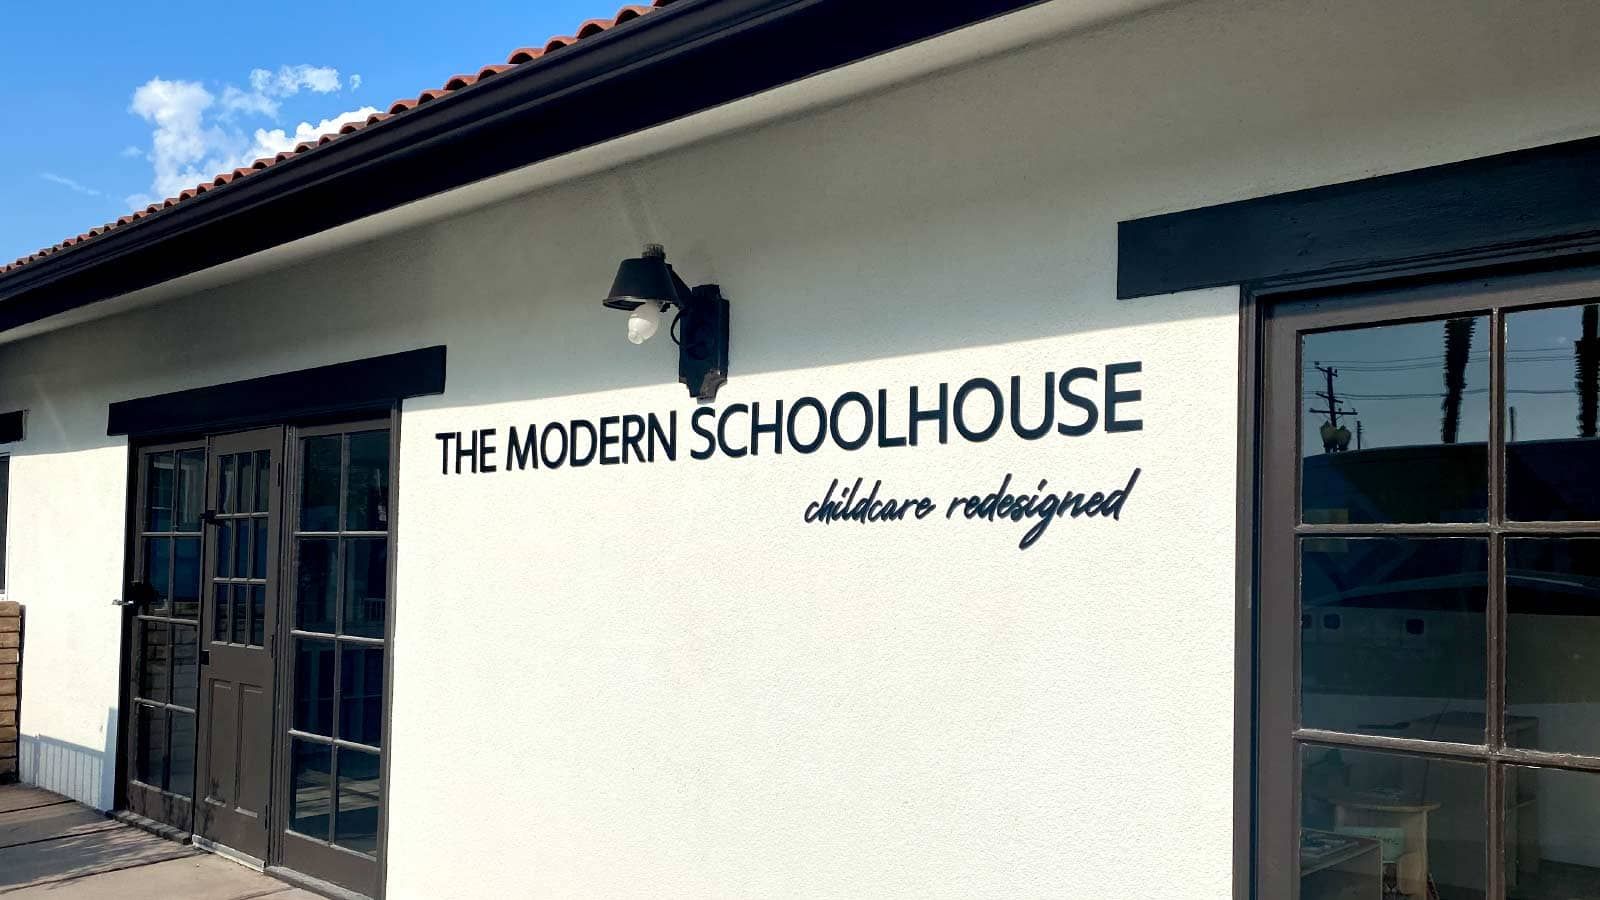 The Modern Schoolhouse 3D sign attached to the wall